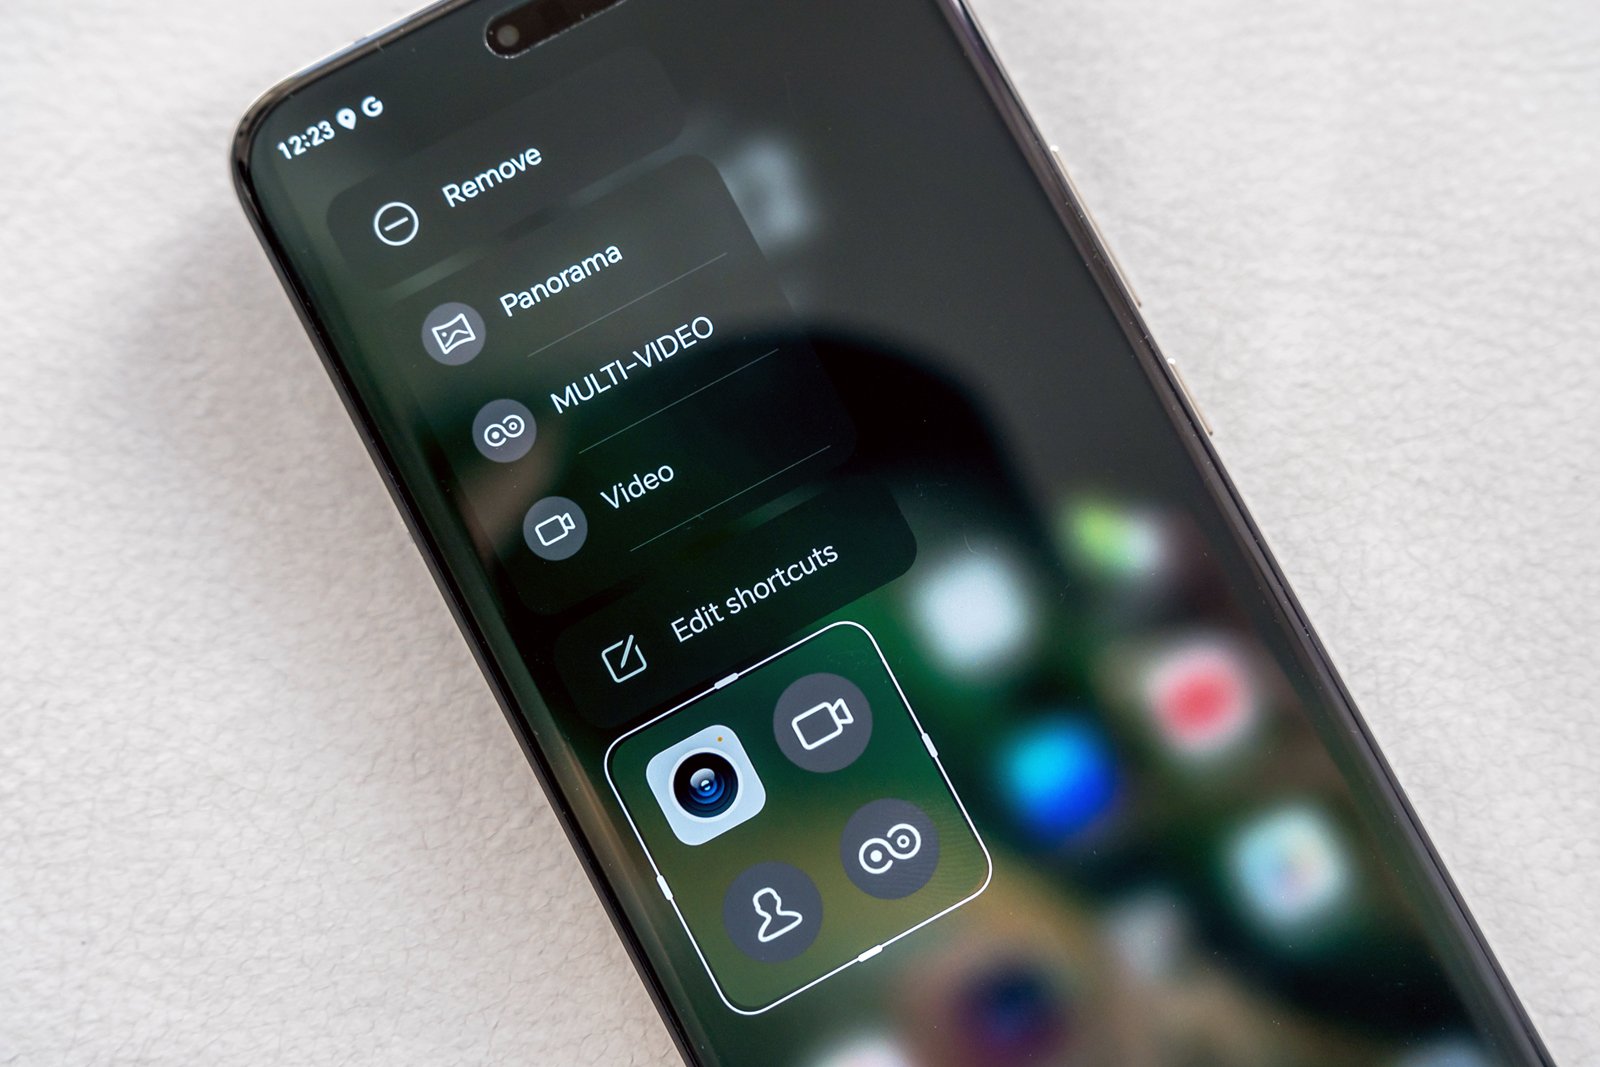 Close-up of a smartphone screen displaying camera settings with options for video, panorama, and multi-video on a blurred app icon background.